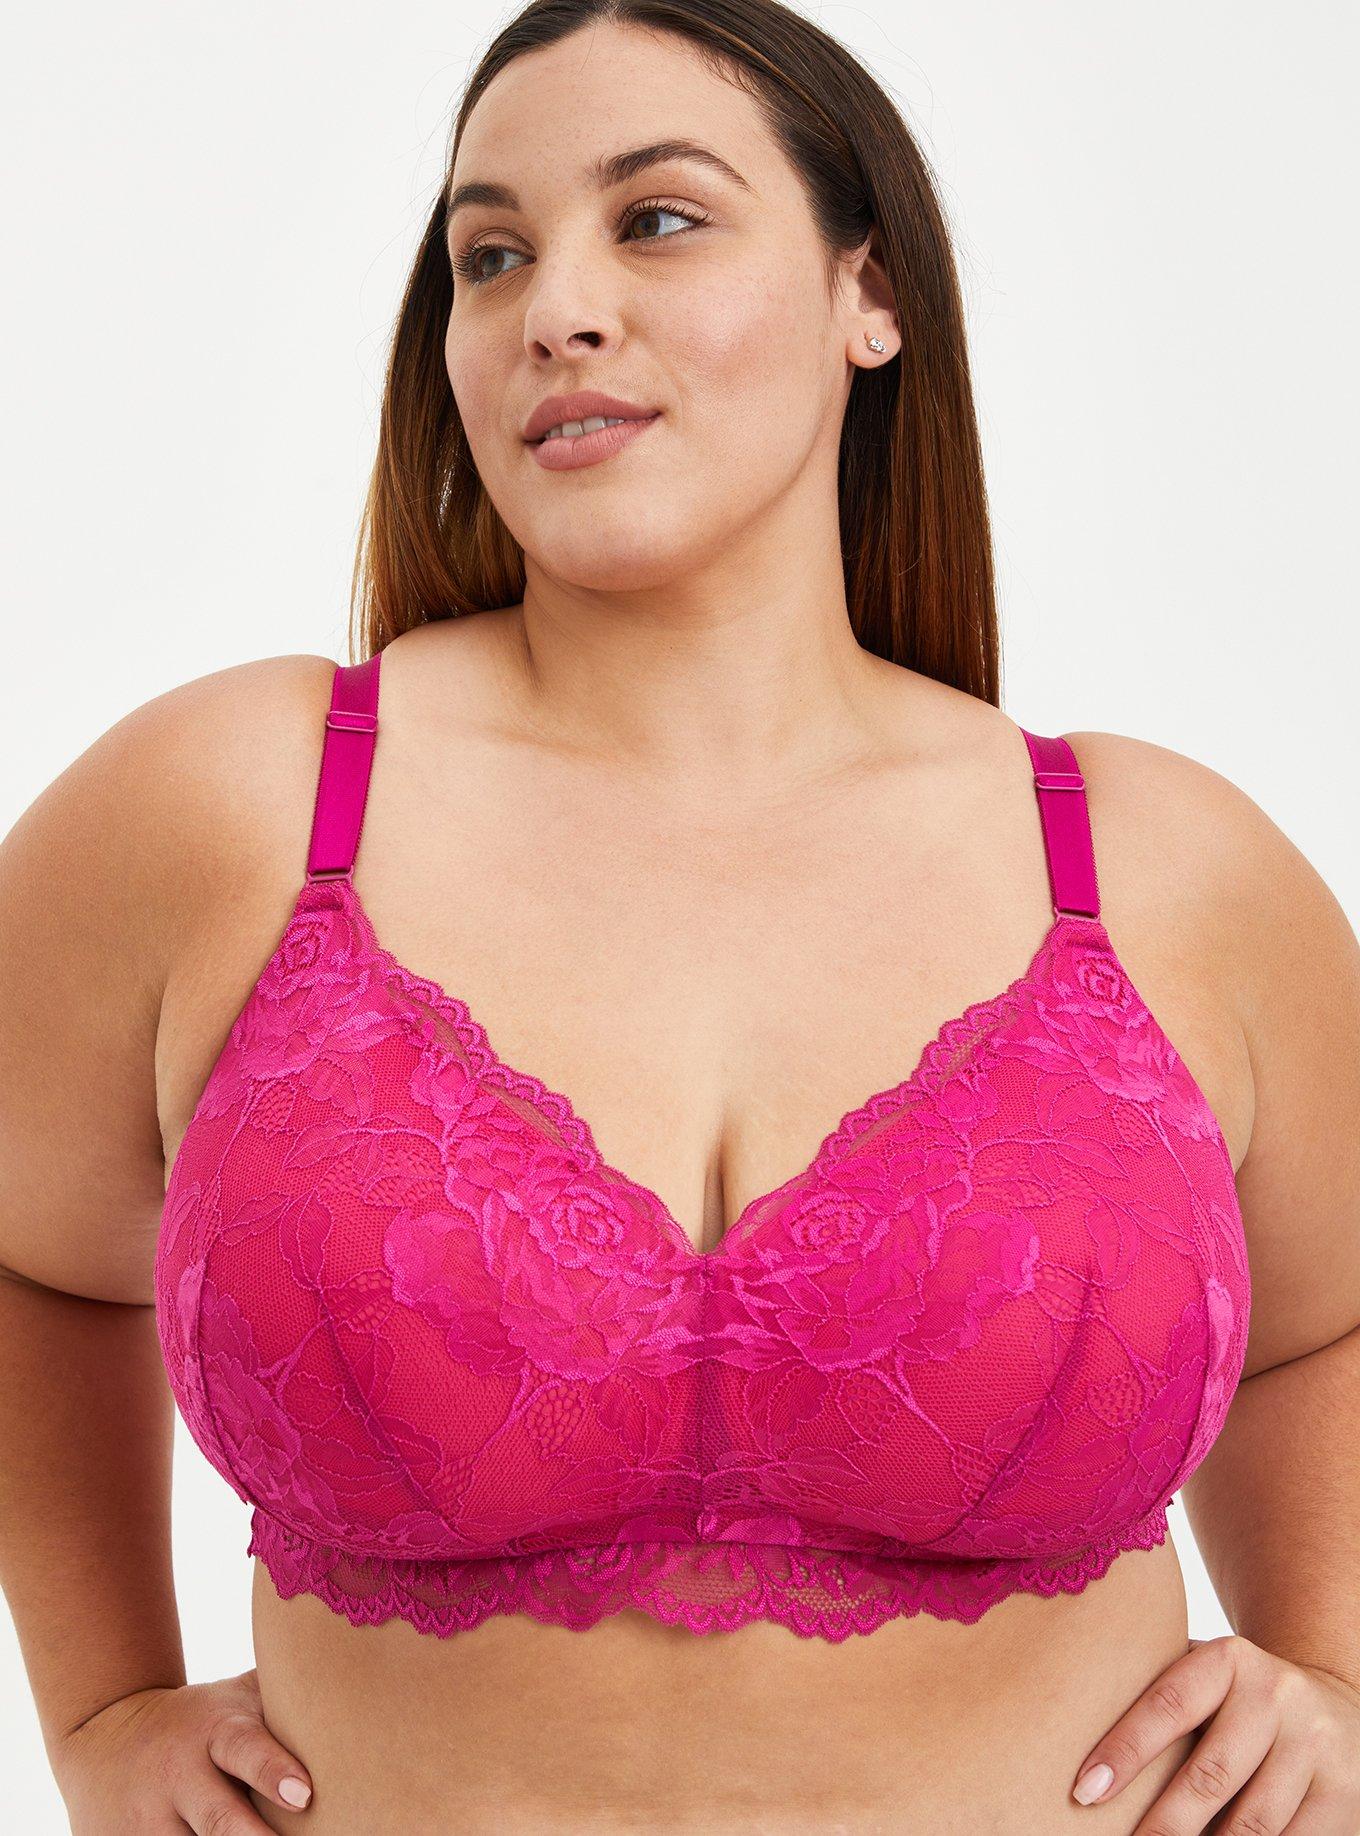 Torrid Curve 42B Pink Lightly Lined No Wire Bra Size 42 B - $21